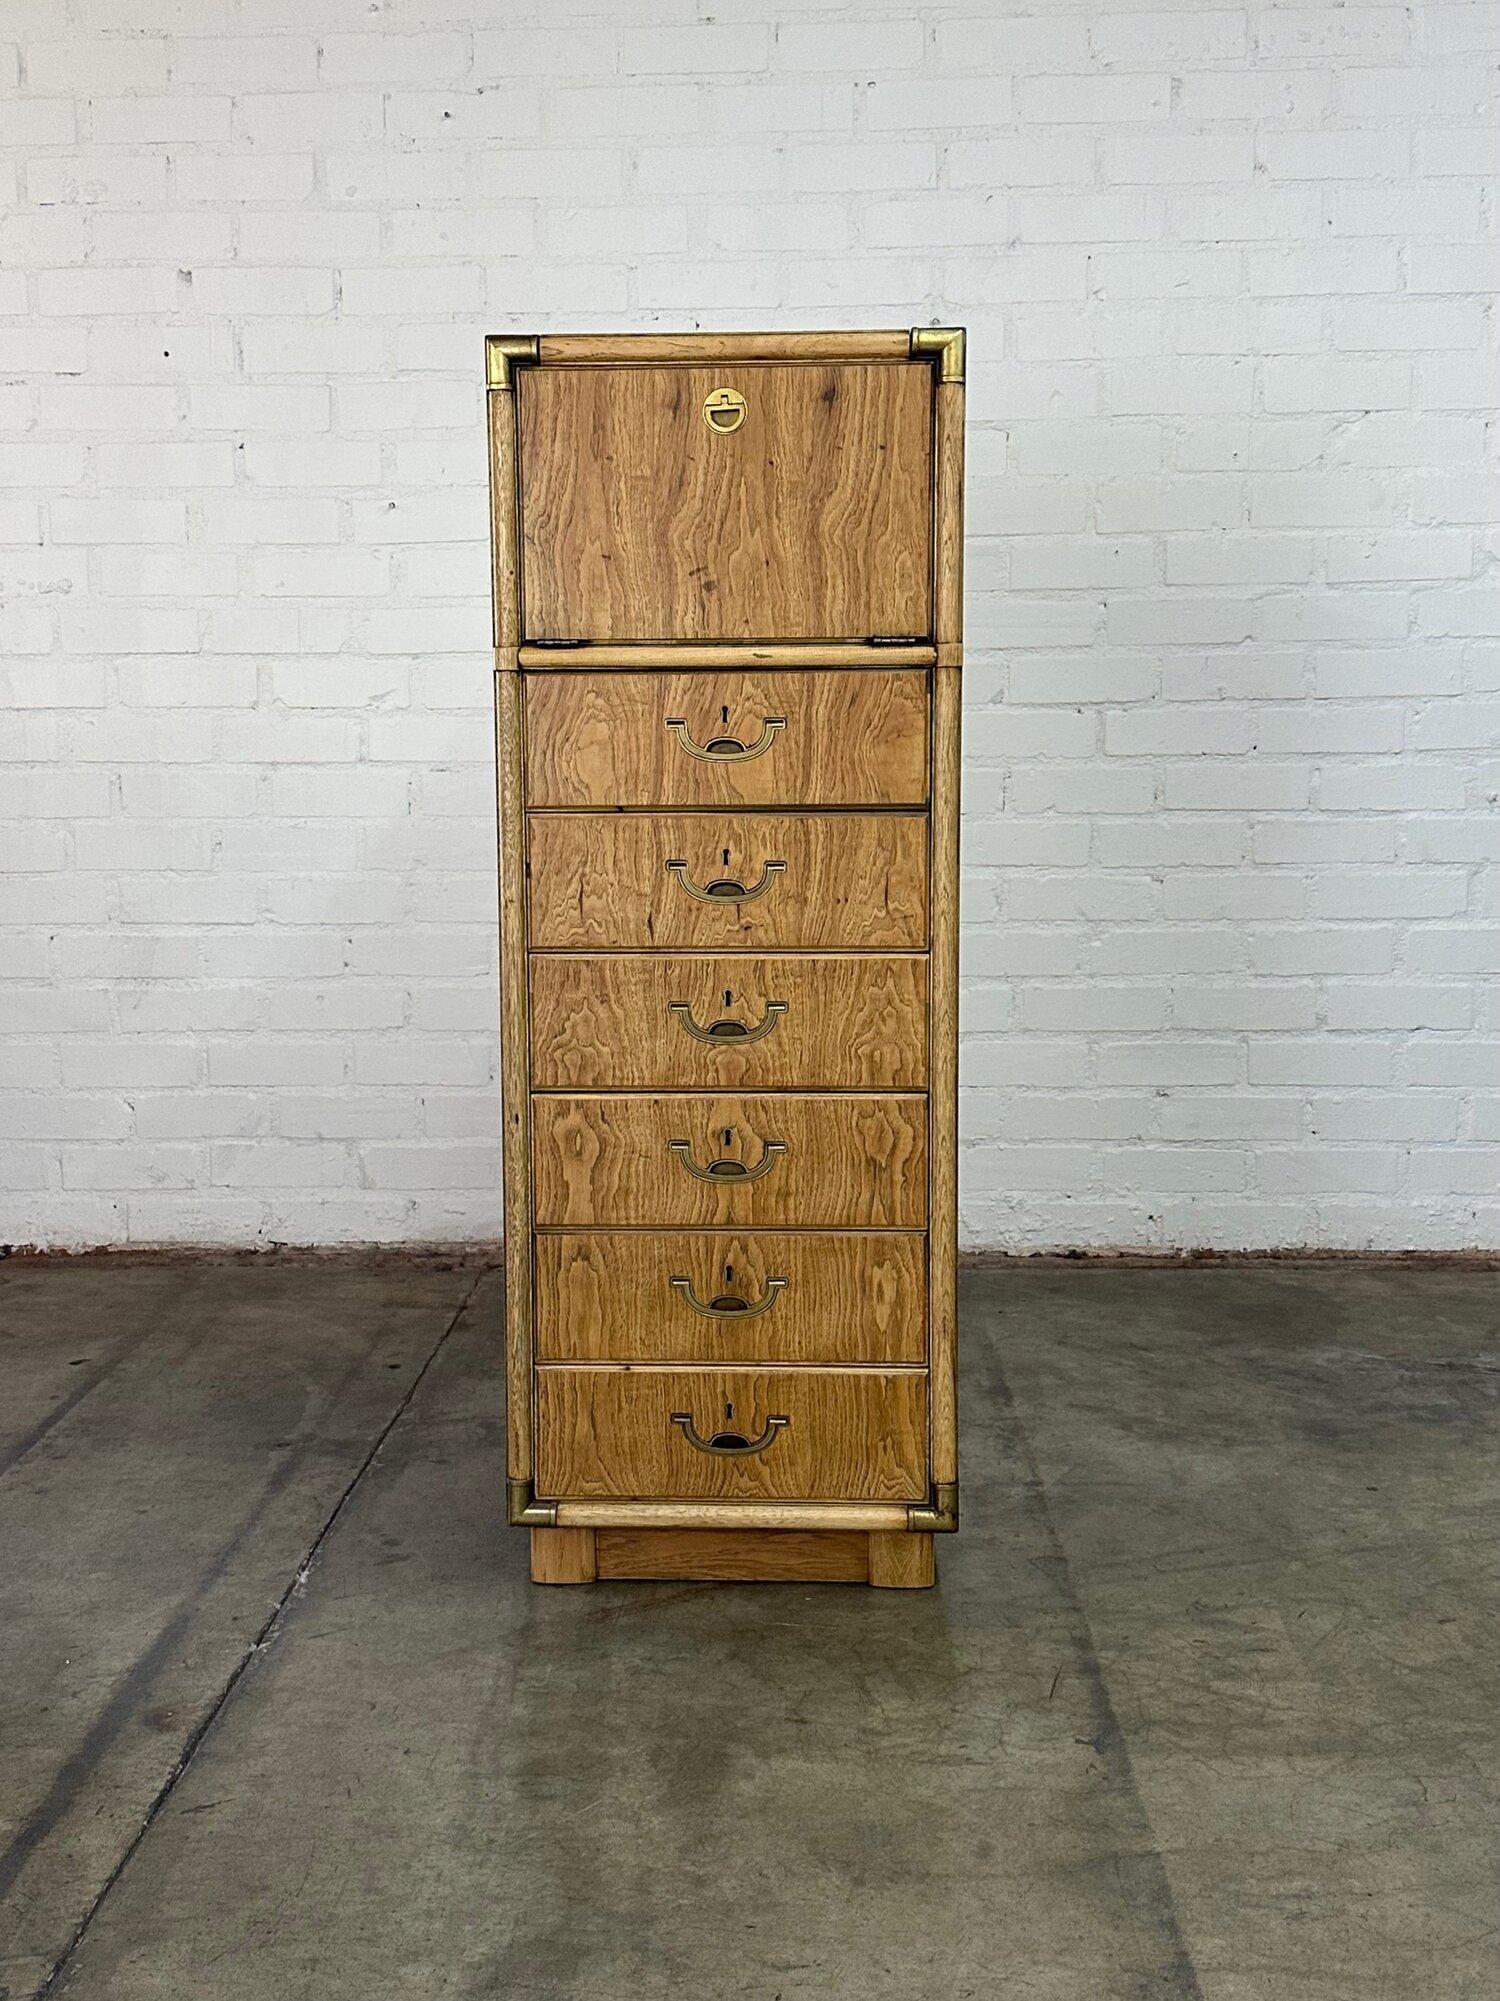 W20.5 D15.5 H56

Fully restored tall chest of drawers by Drexel. Item is fully functional and structurally sound. This item has been clear coated and shows natural grain and color hue. Chest features original hardware and pop up mirror. 